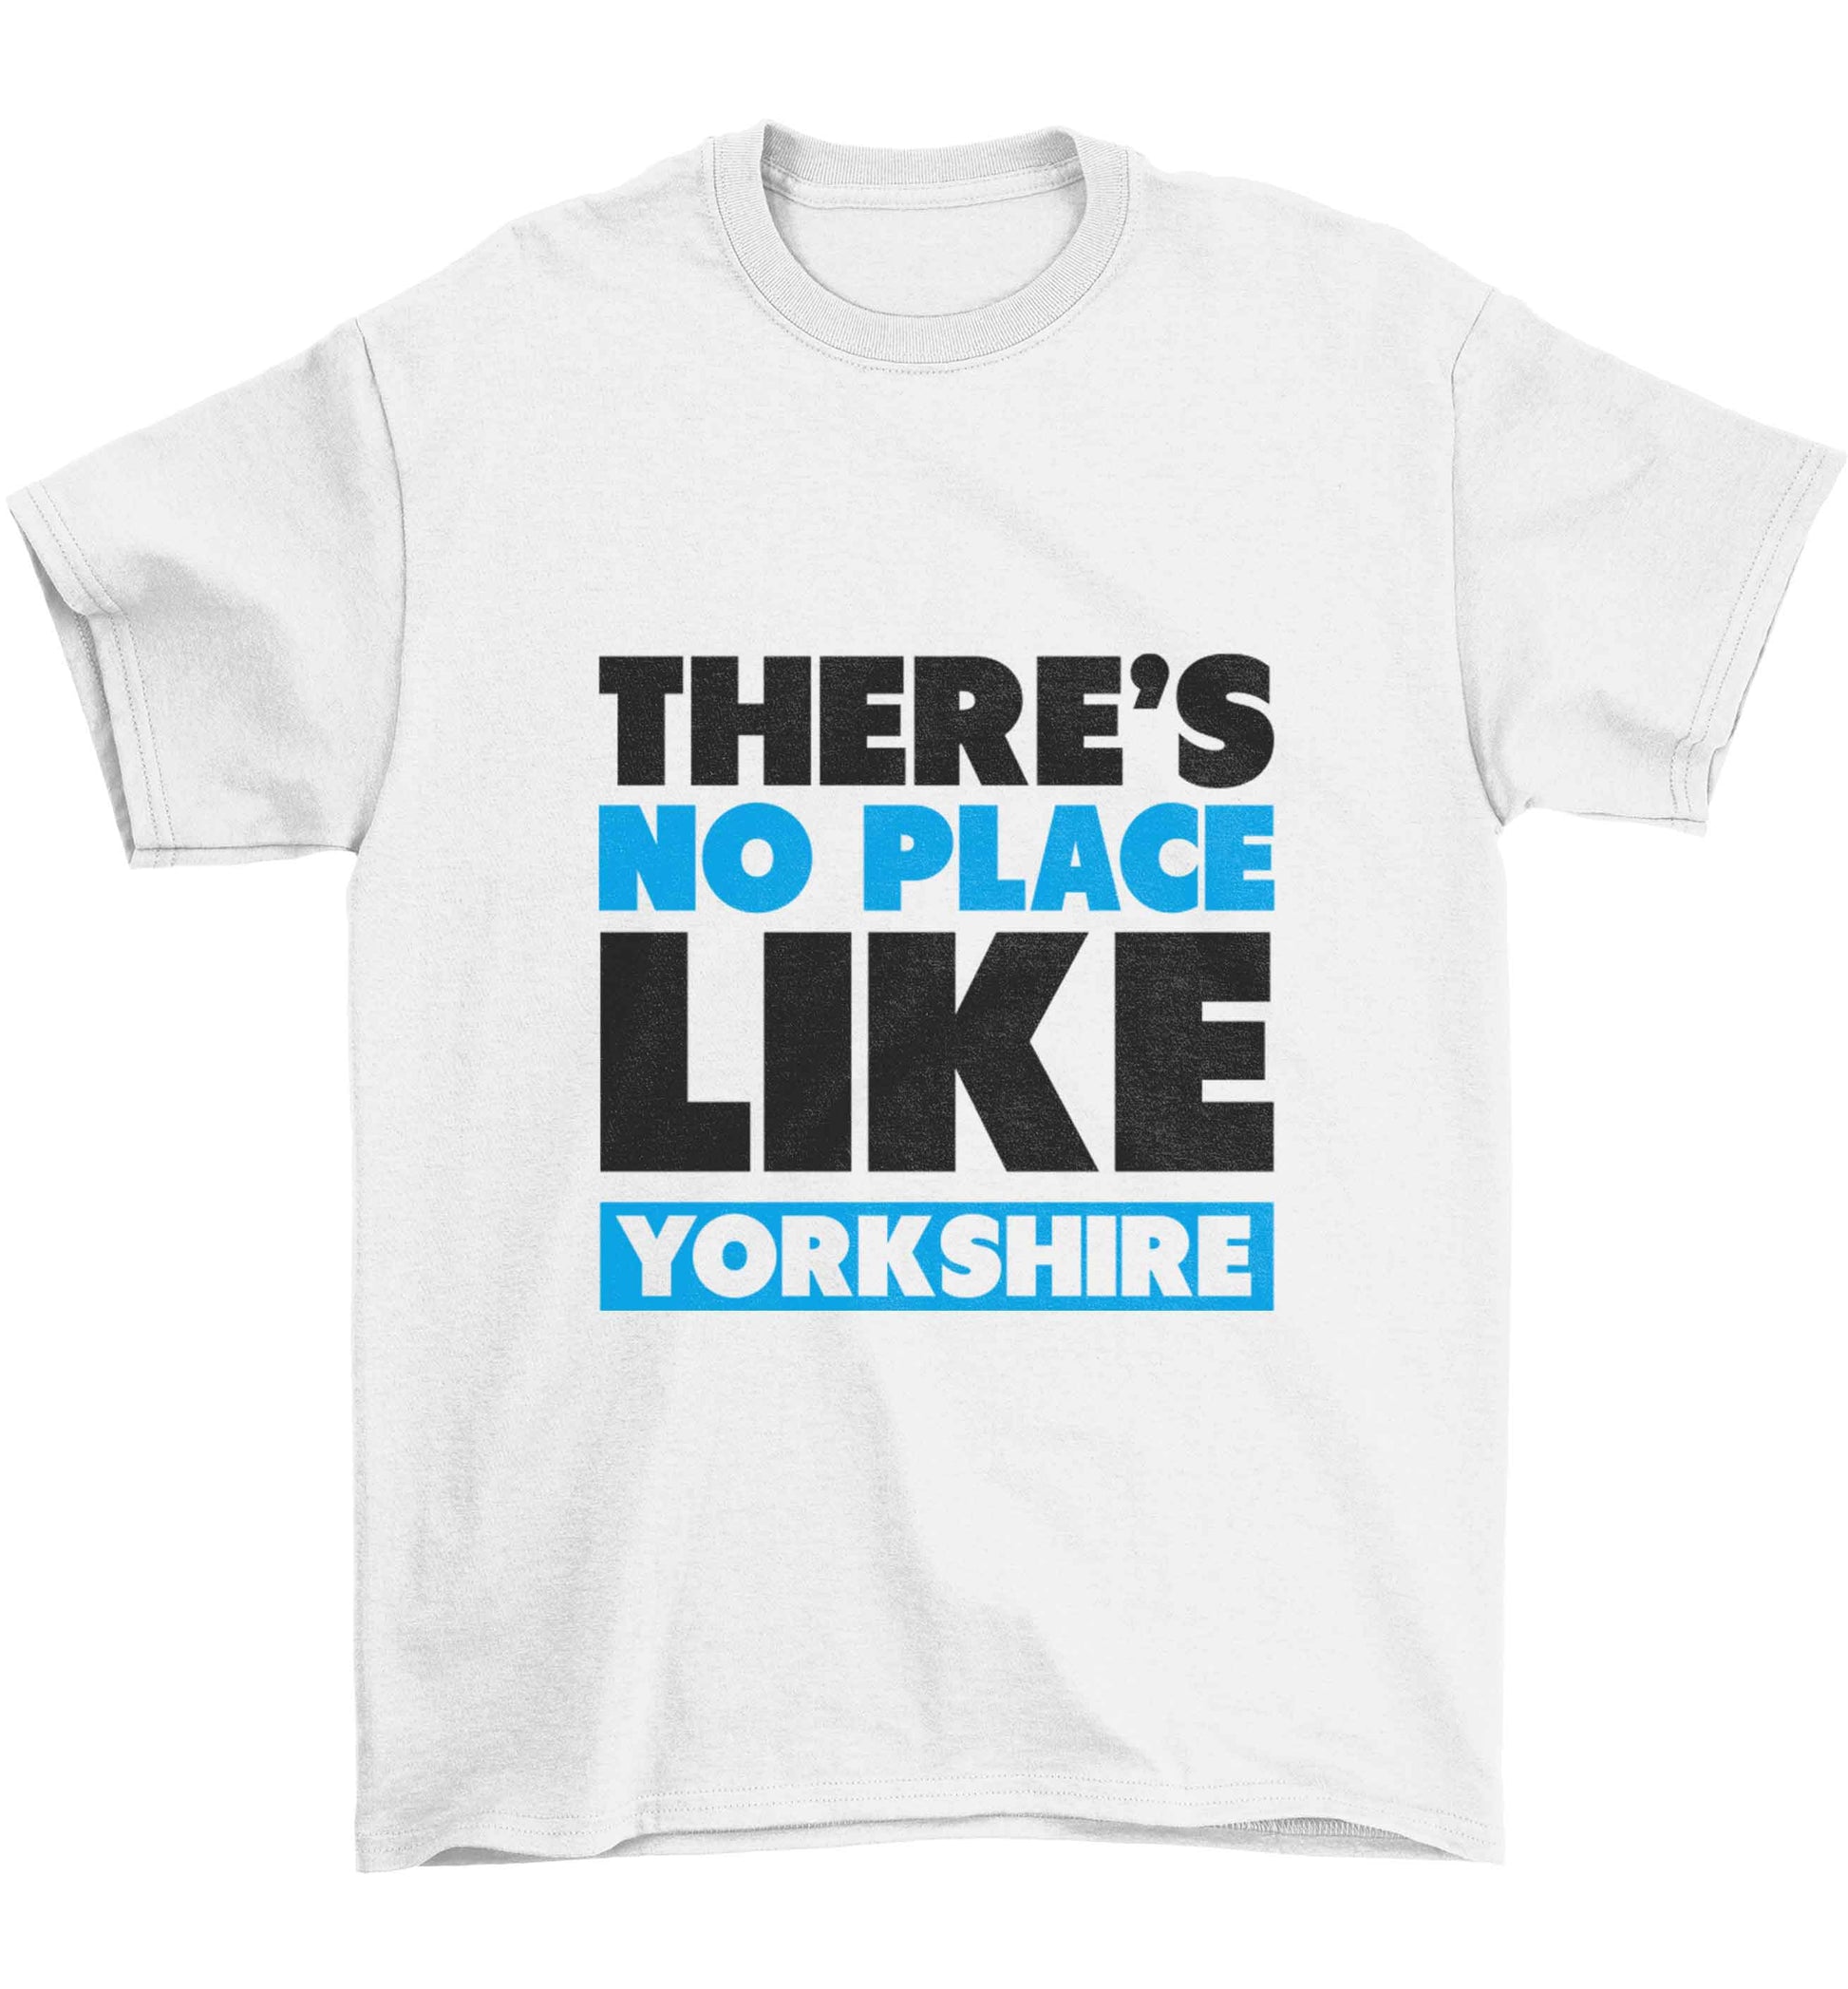 There's no place like Yorkshire Children's white Tshirt 12-13 Years